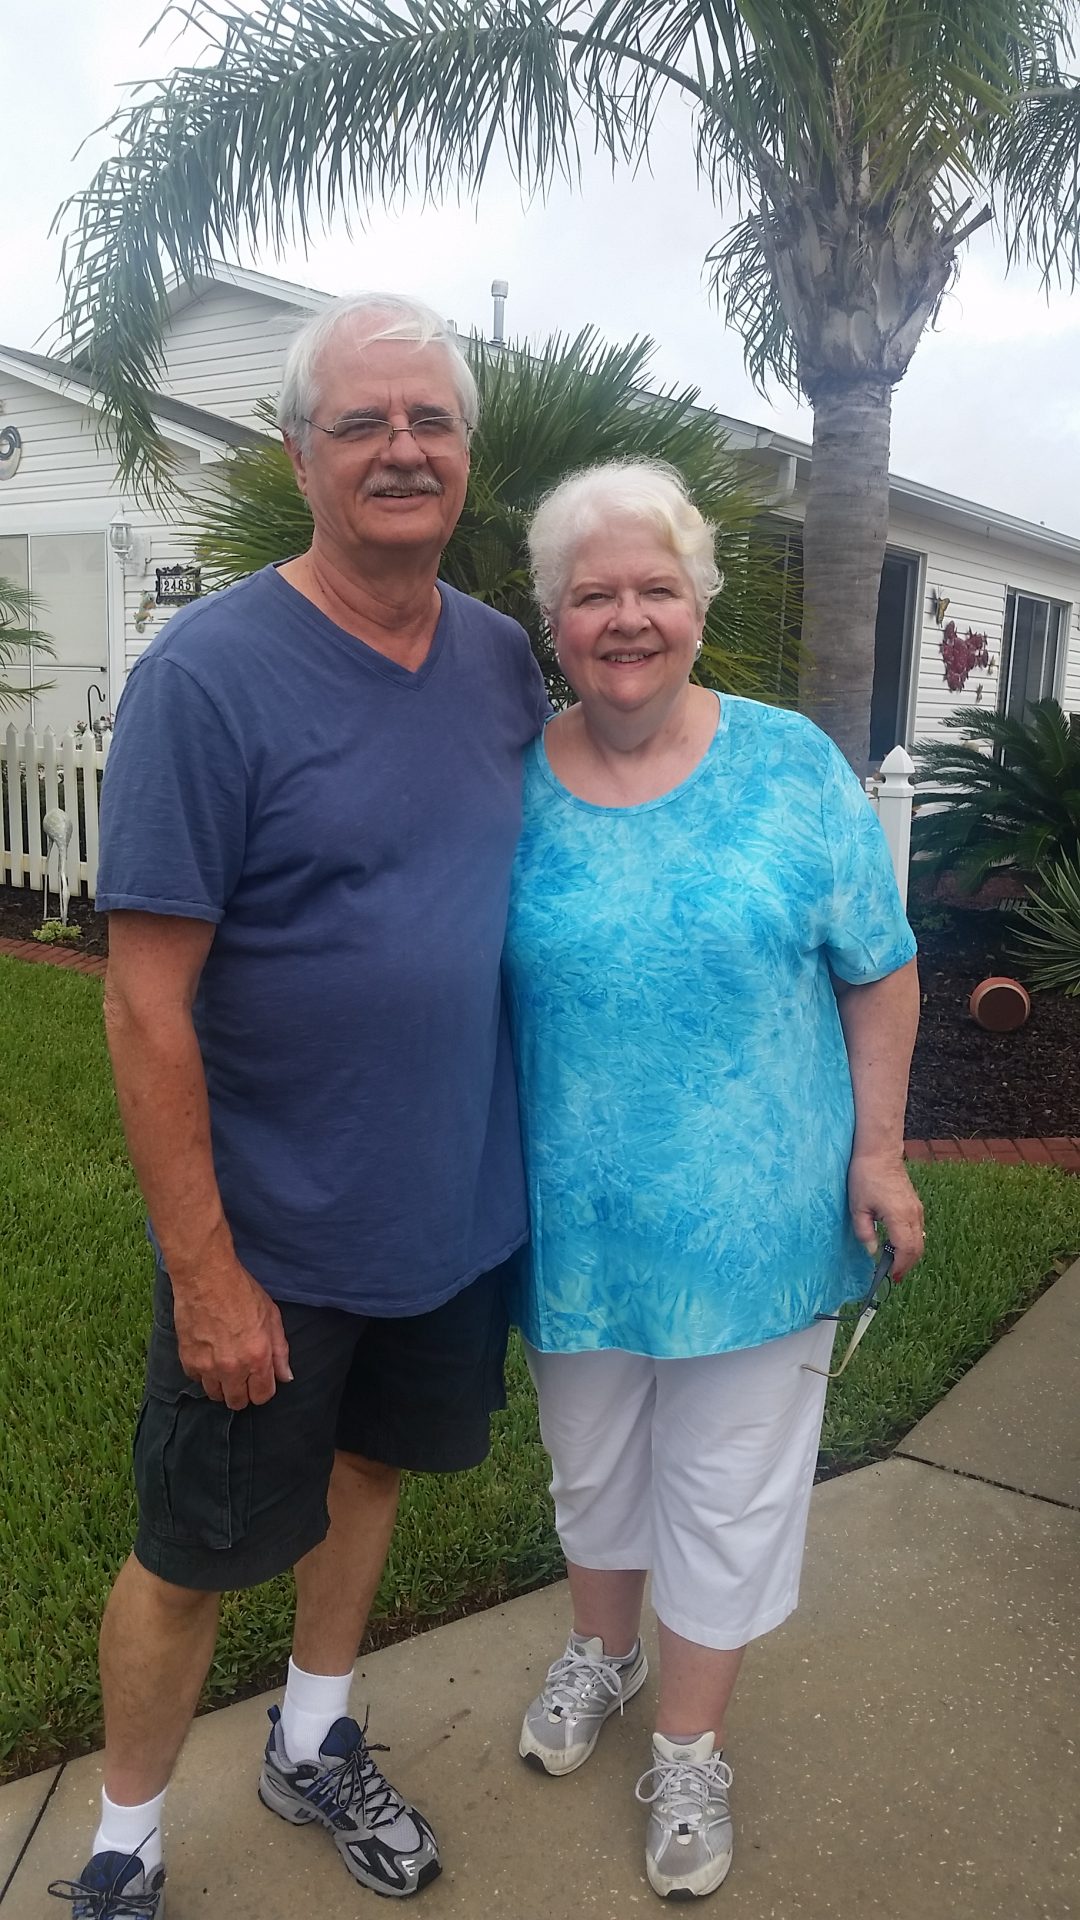 This photo was taken in August 7, 2017 during one of Sal & Peg's exploratory visits to The Villages, Florida.  Linda & George are already Village residents.